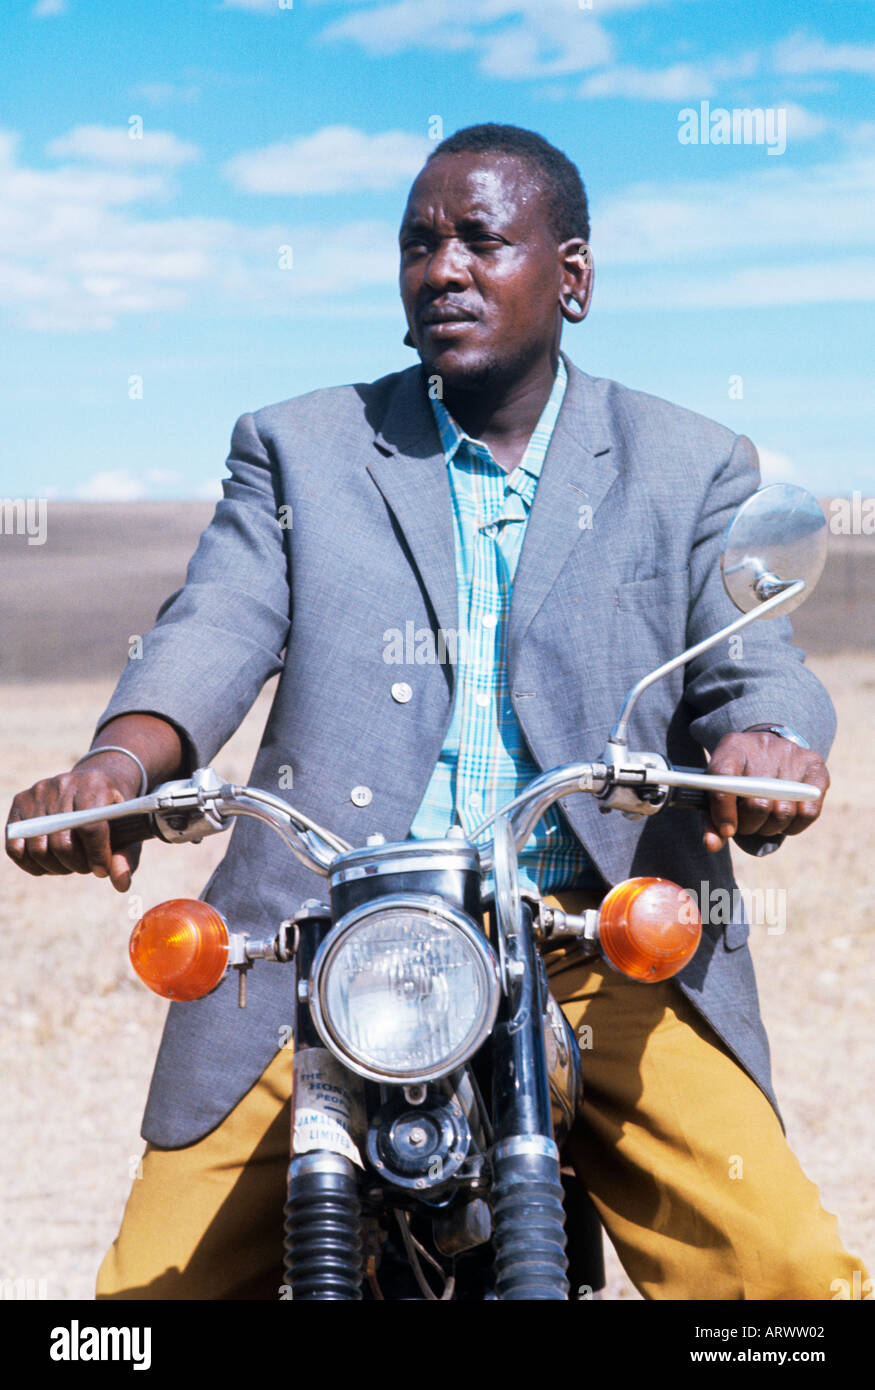 Maasai on a motorbike, tradition exchanged for modern life Stock Photo